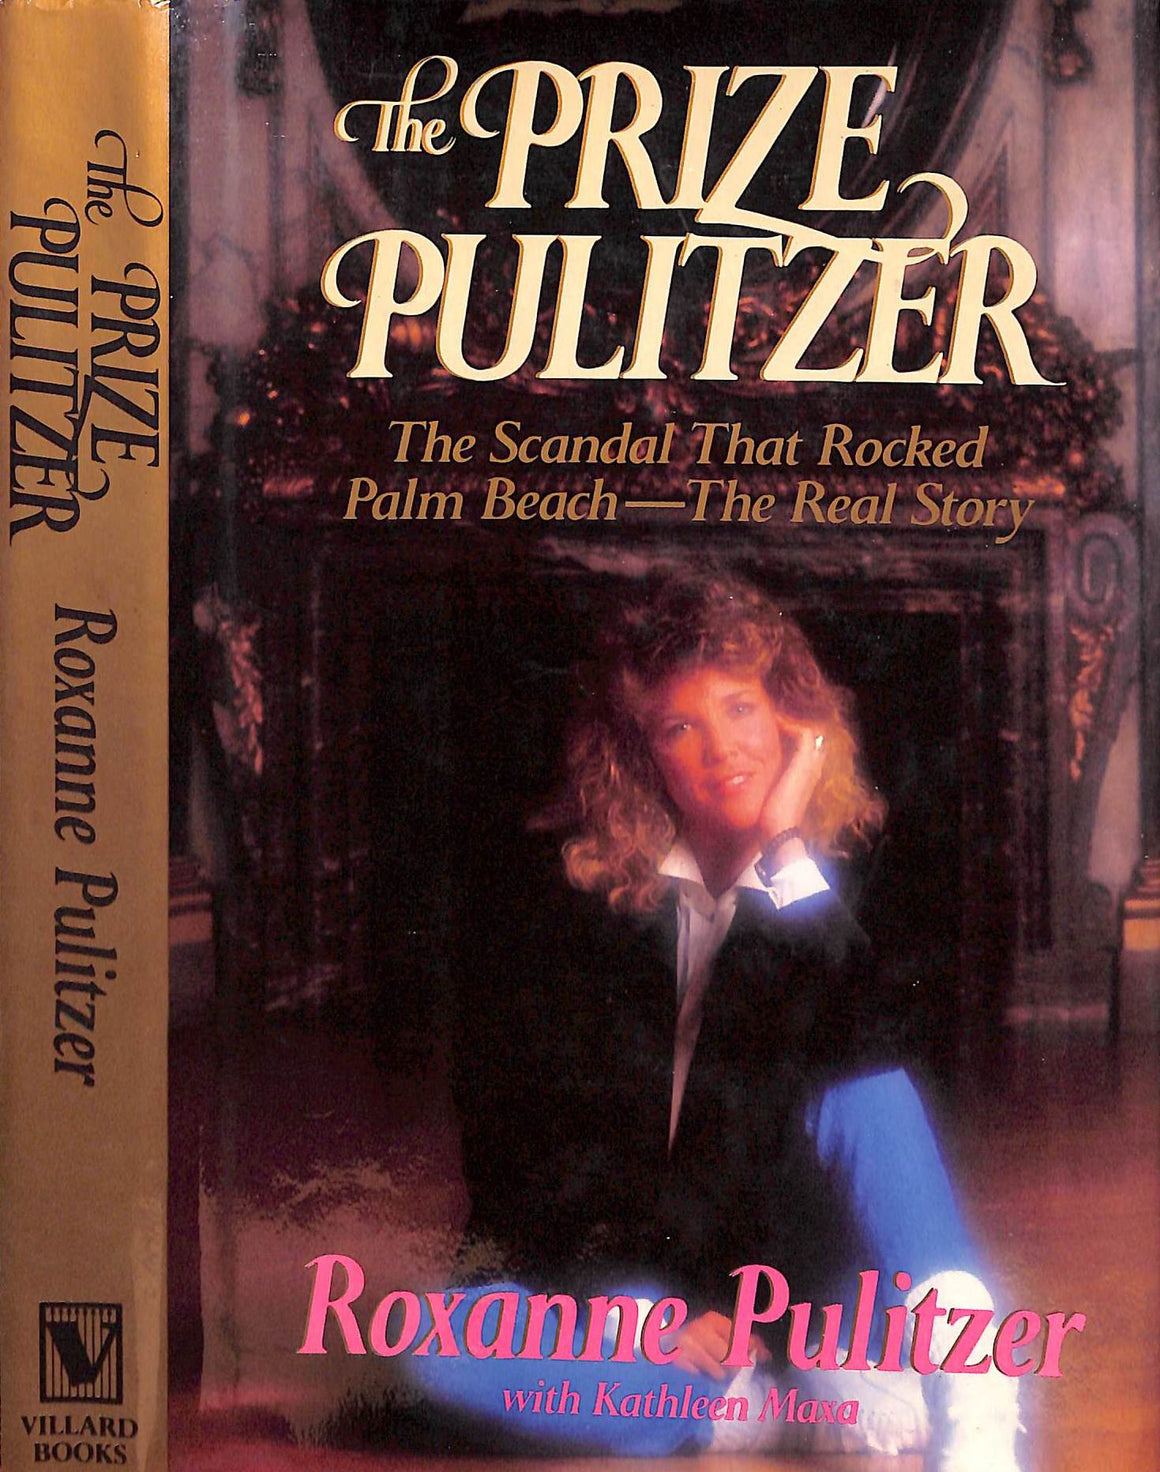 'The Prize Pulitzer: The Scandal That Rocked Palm Beach' 1987